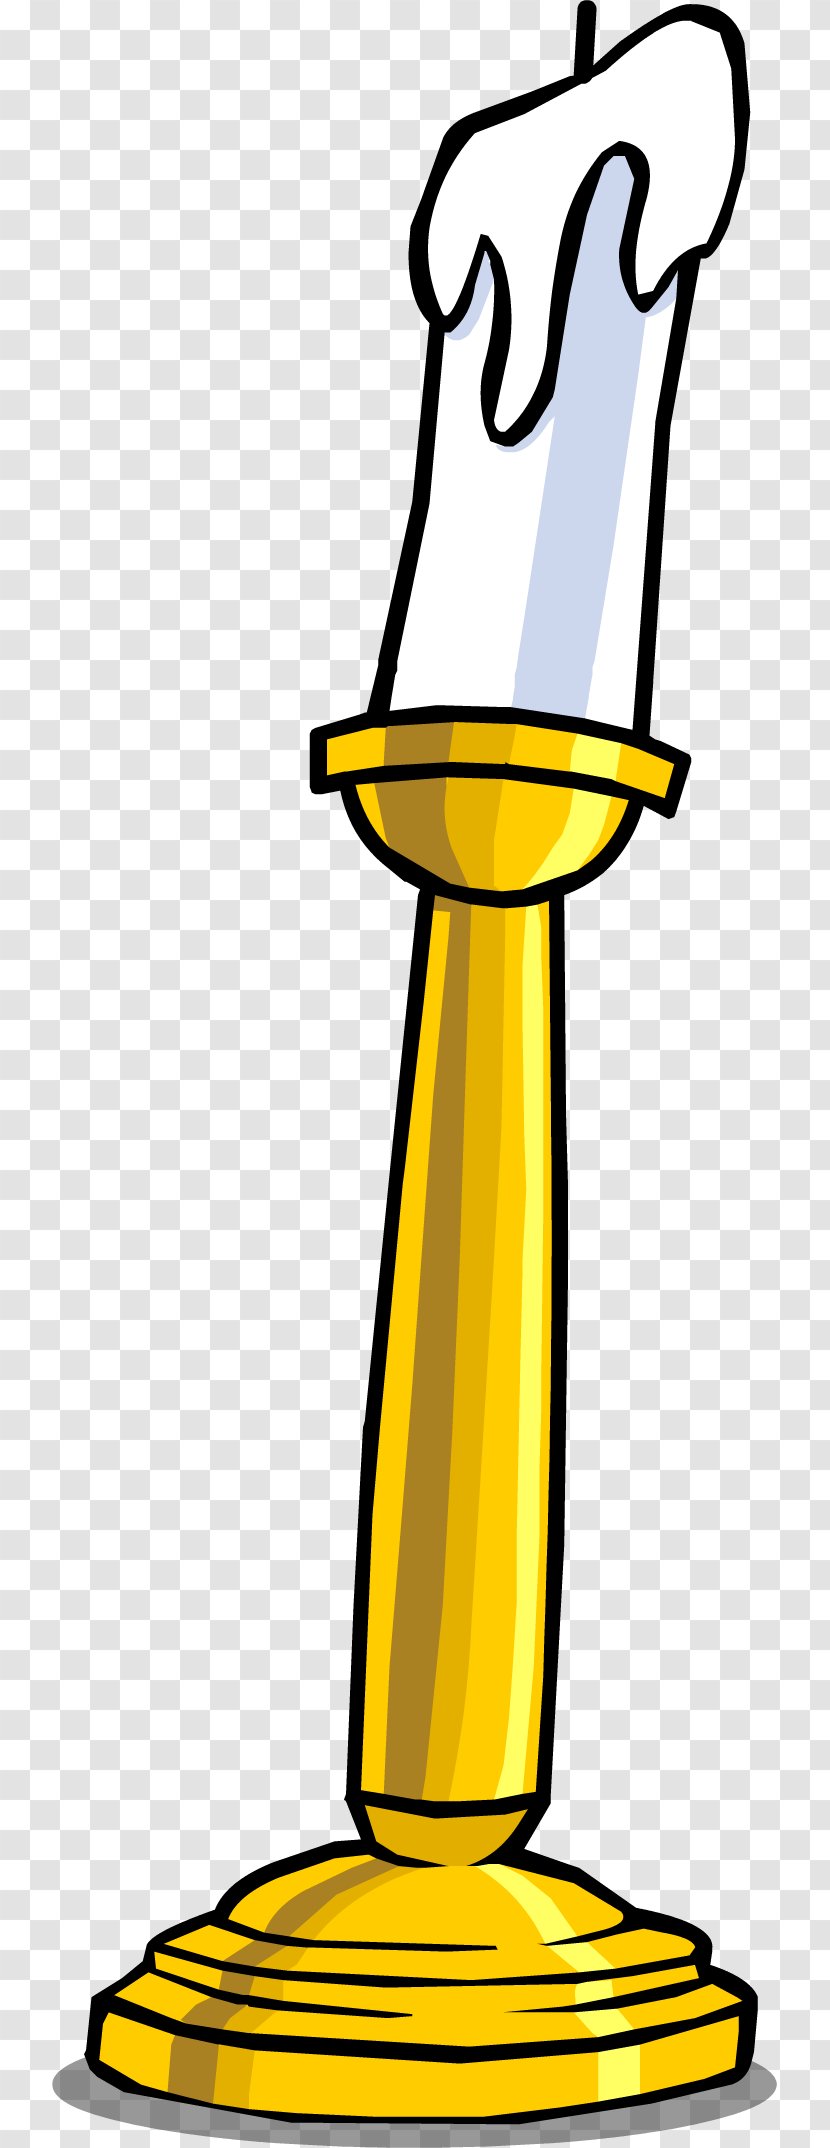 Club Penguin Igloo Candle Wikia - Game - Stick Transparent PNG